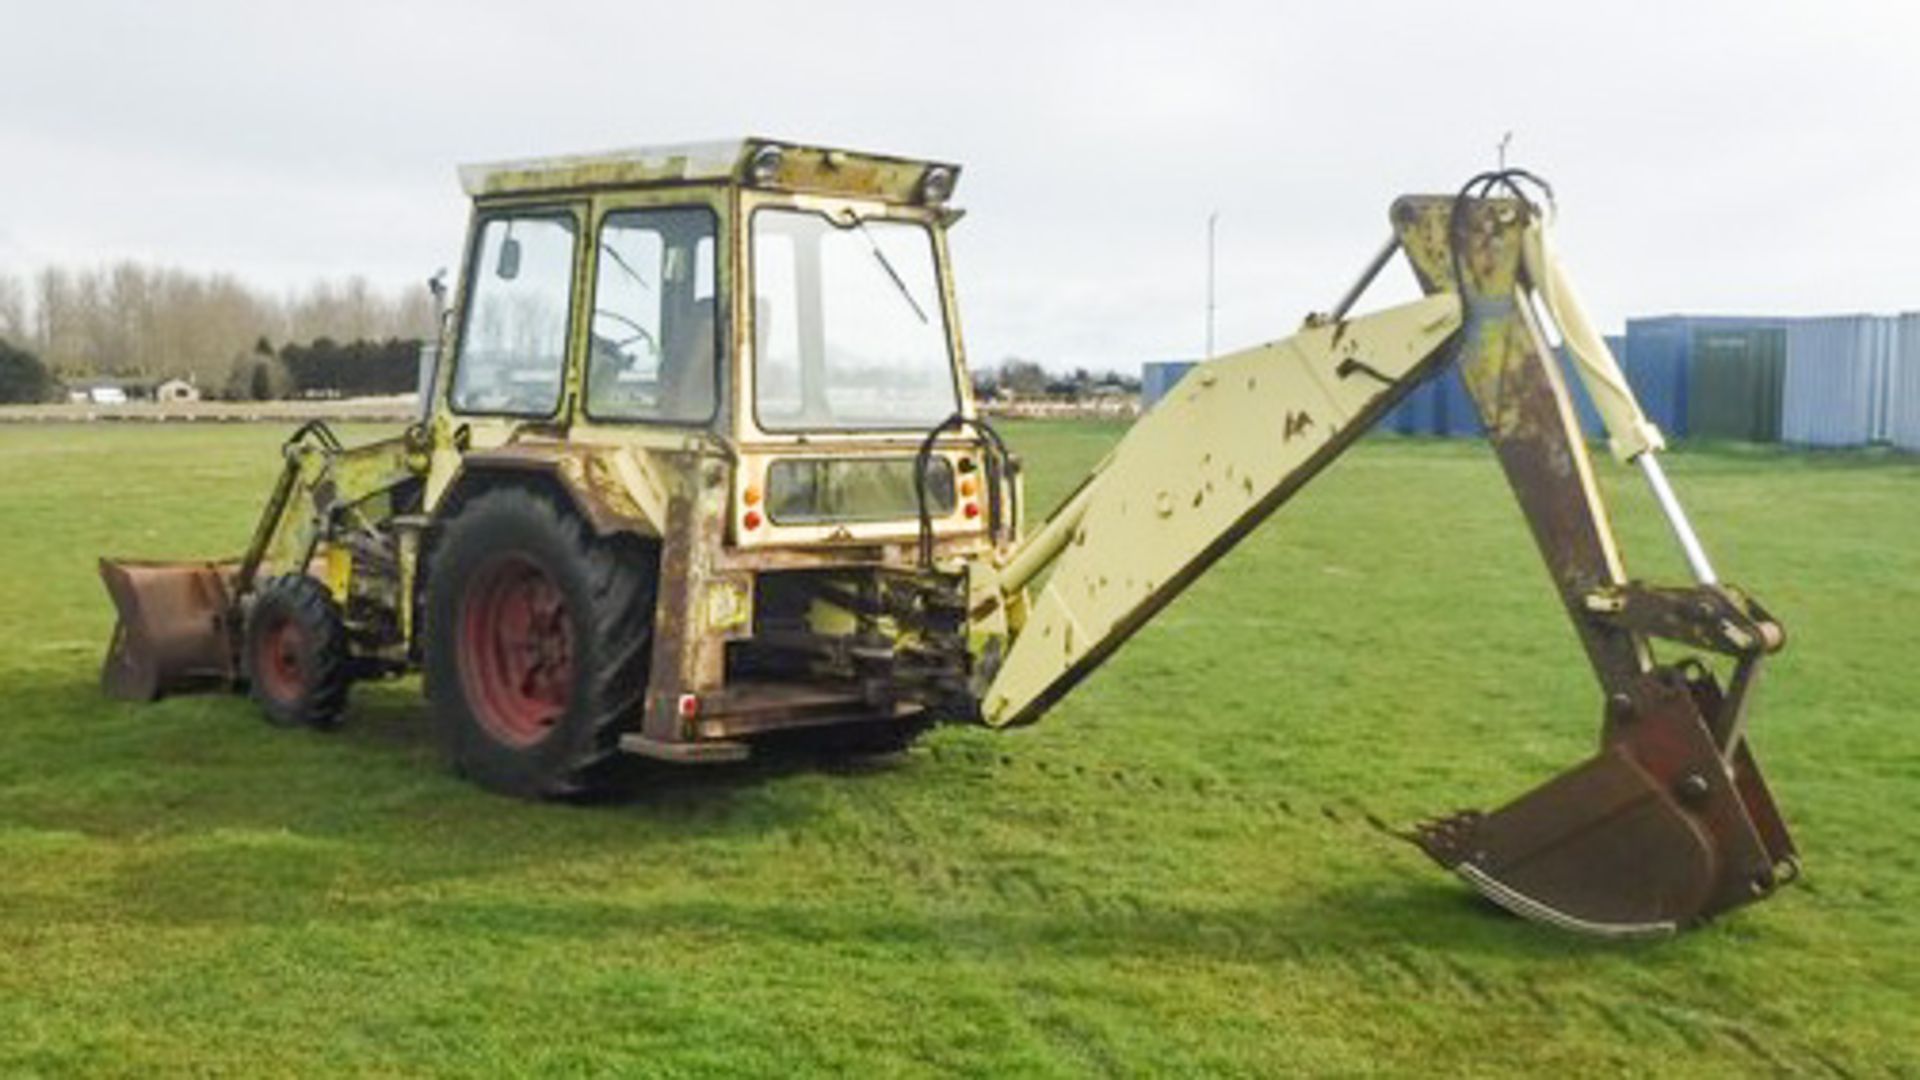 1972/1973 HYMAC 270 BACKHOE LOADER, SN 207-270, 4182 HOURS (NOT VERIFIED), ENGINE NO C407354, CHASSI - Image 7 of 11